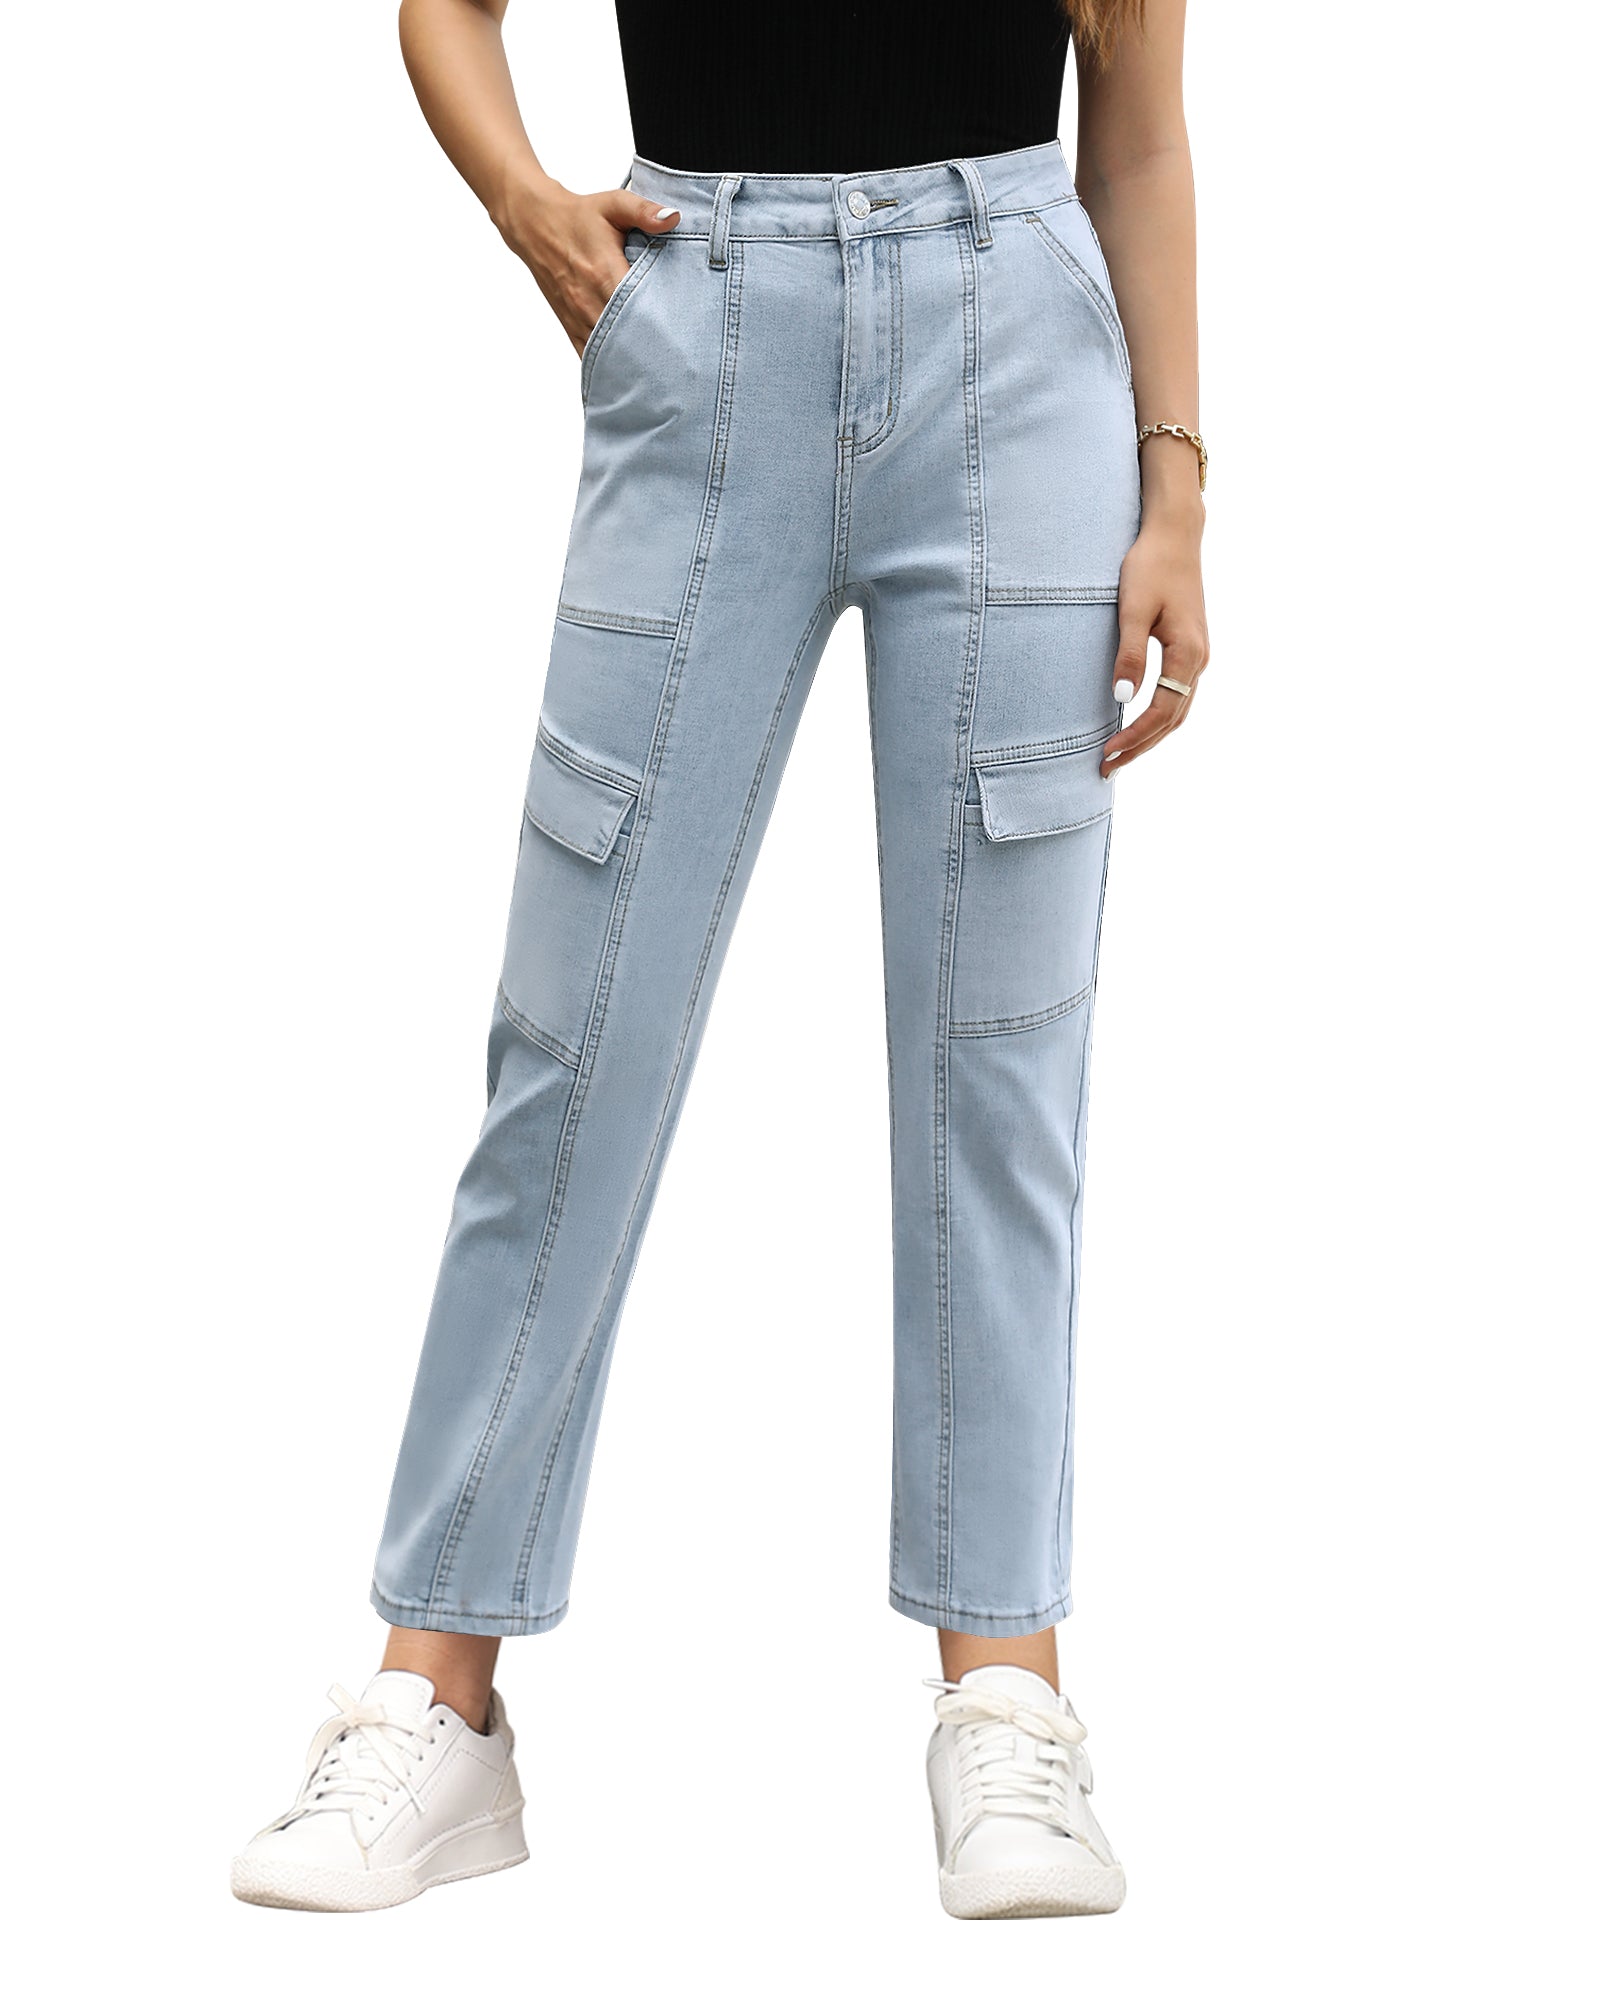 GRAPENT 2023 Jeans for Women Fashion Cargo Pants High Waisted